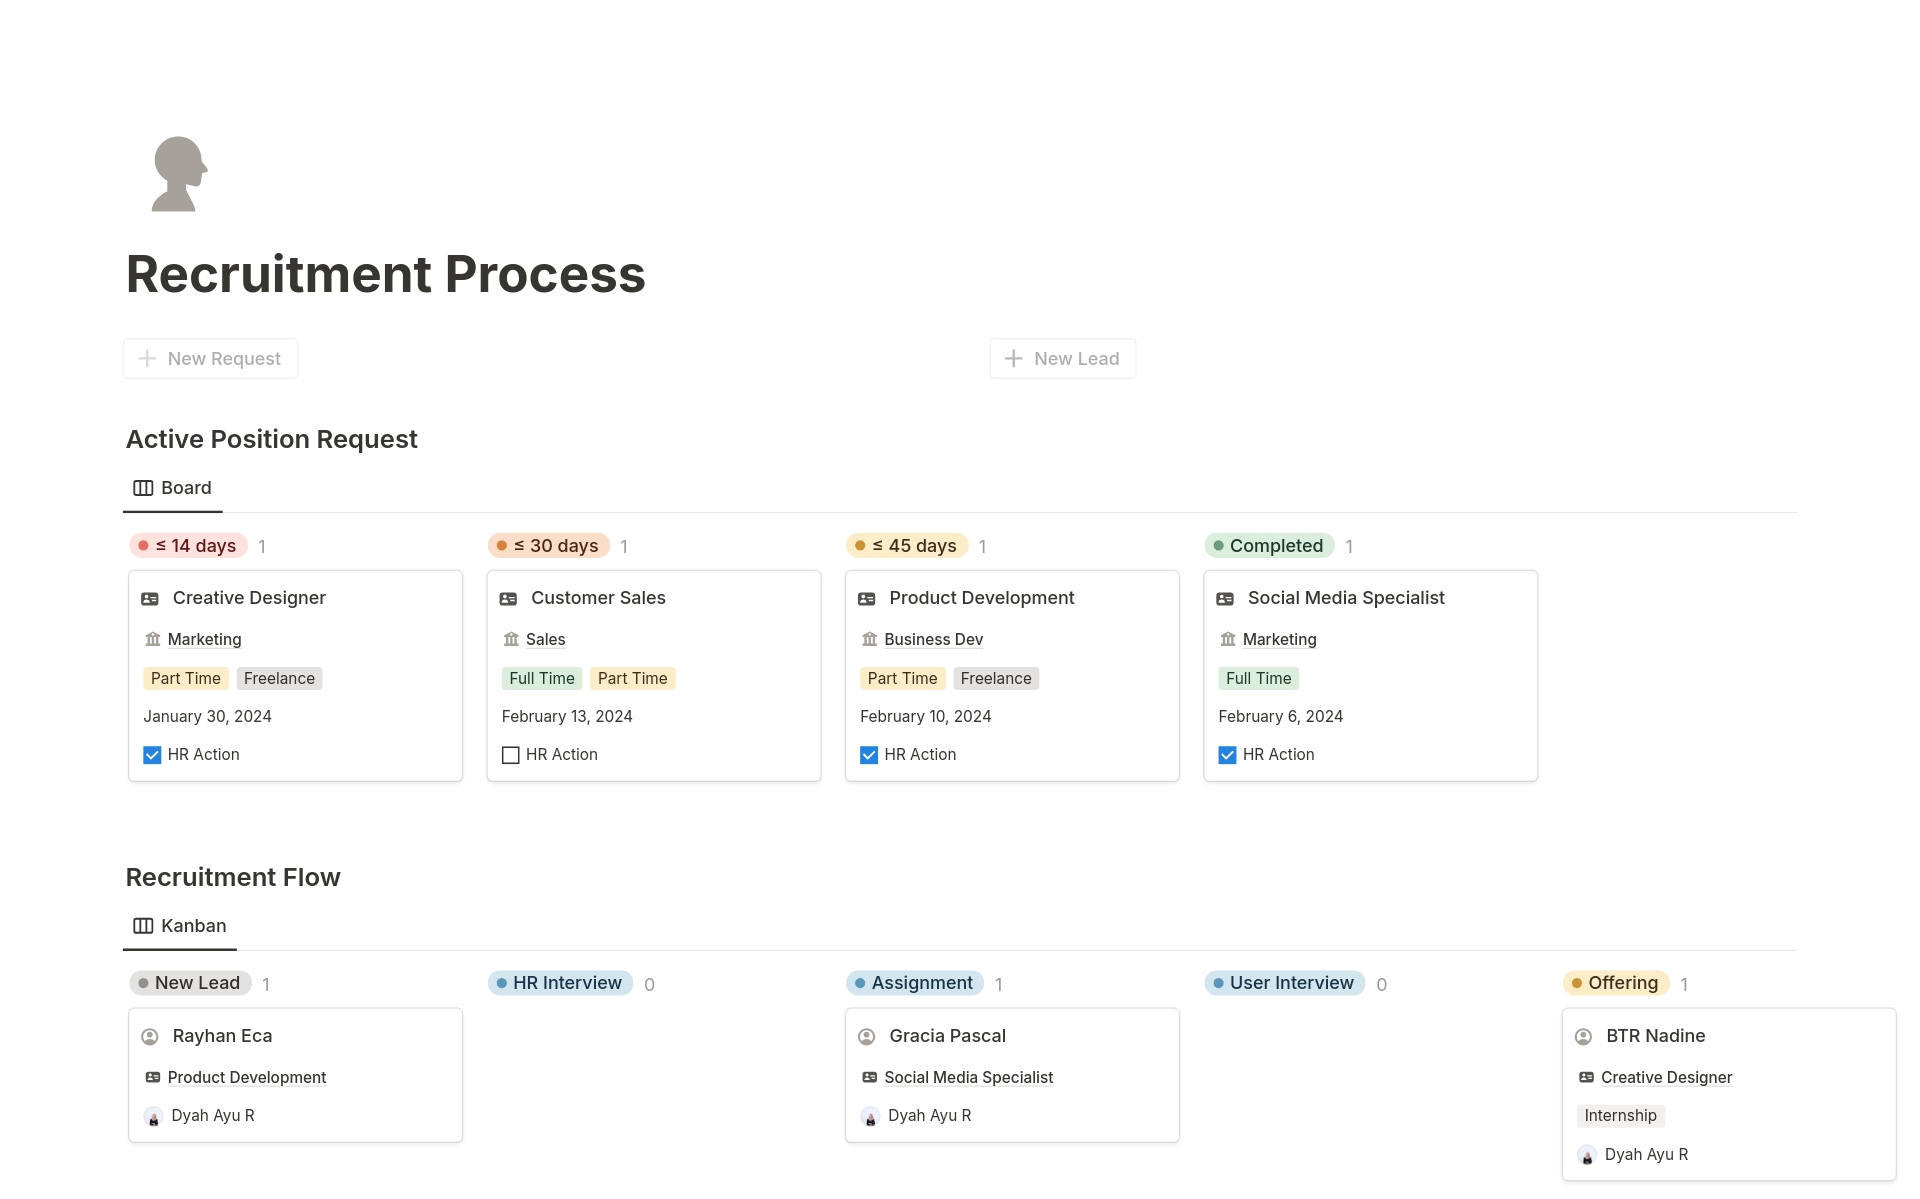 Transform your recruitment process with our Notion template. Seamlessly track active position requests from HR and other departments, utilizing Kanban and table views. Input interview results and assignments for streamlined candidate management, ensuring a smooth hiring process.